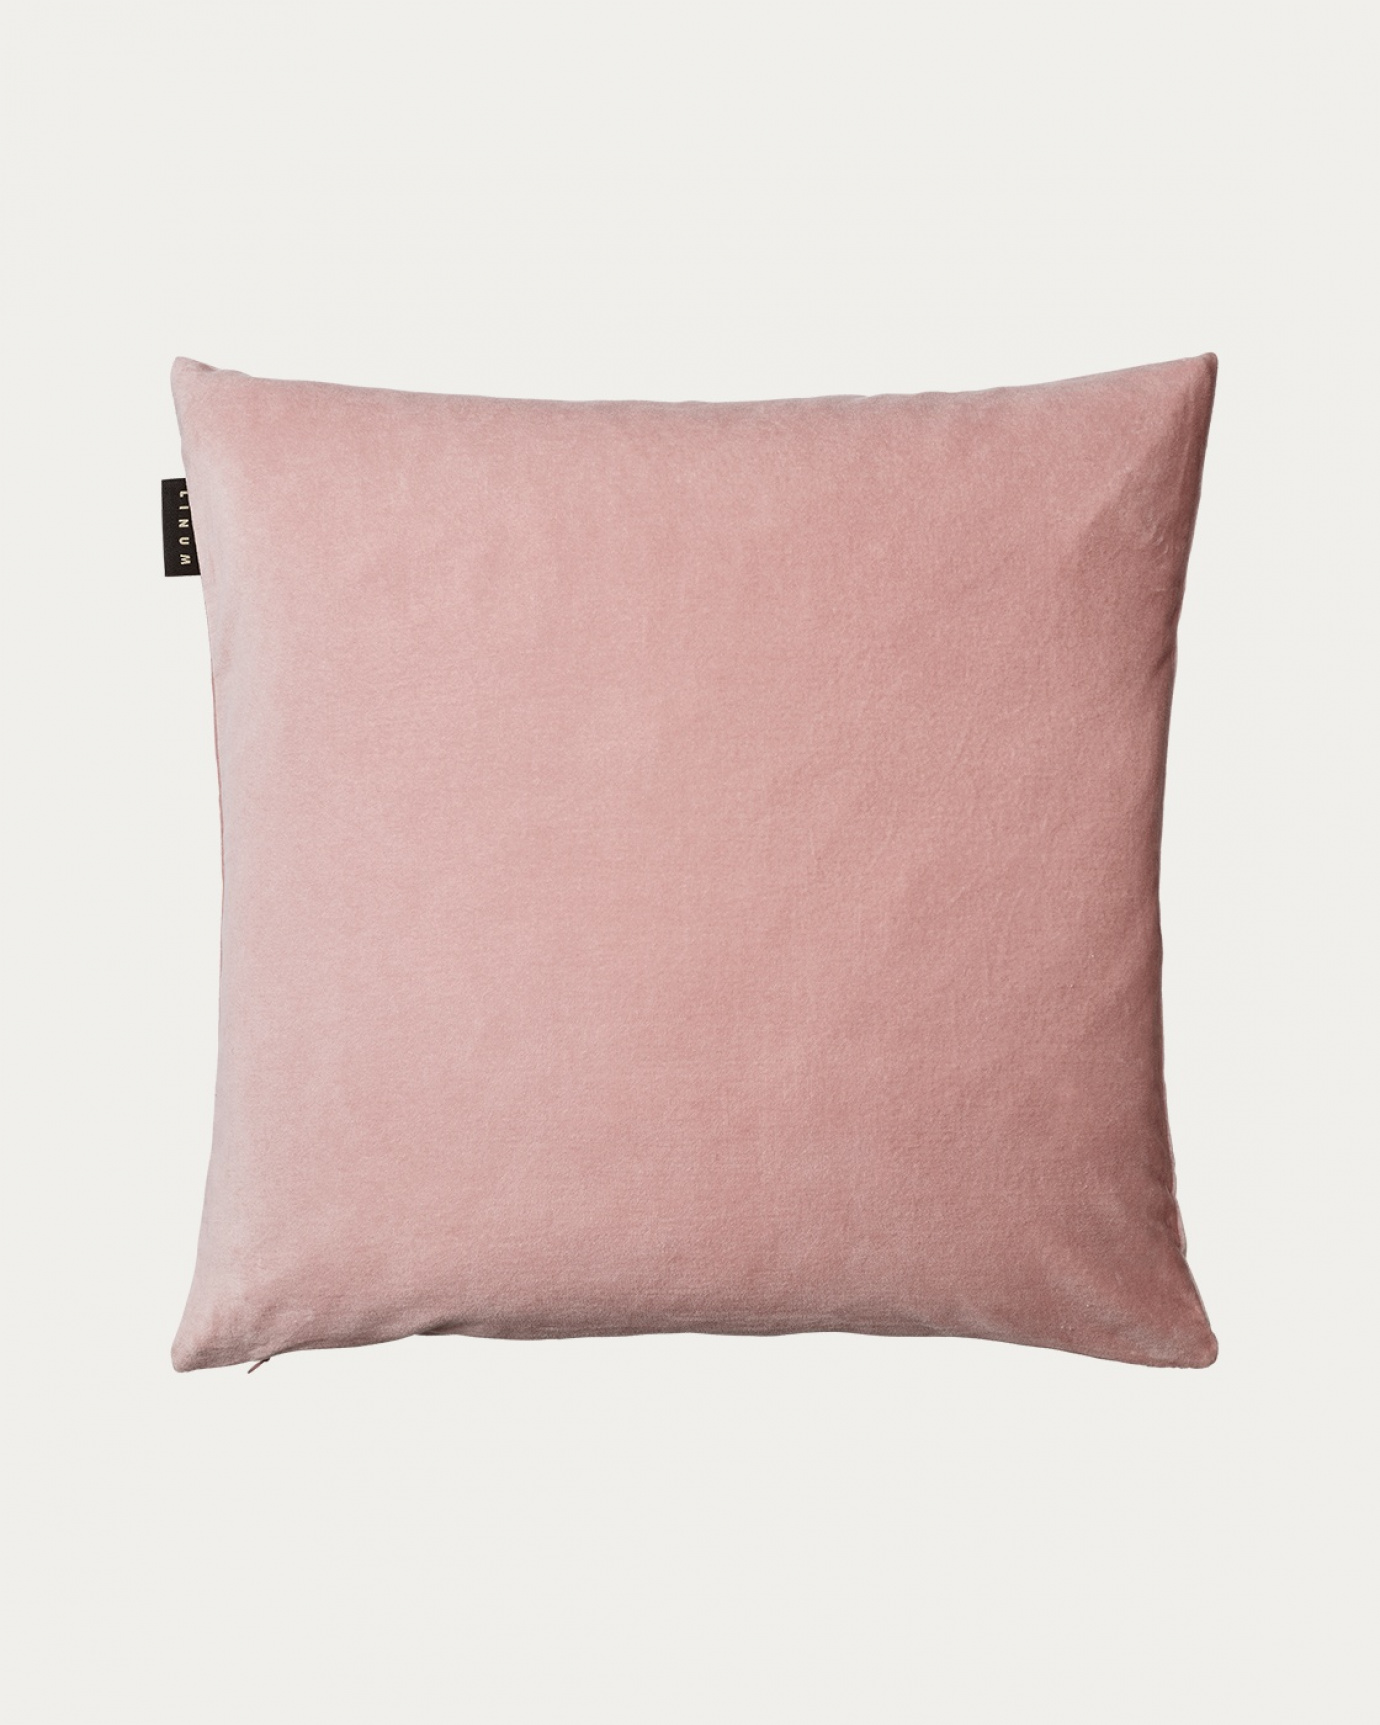 Product image dusty pink PAOLO cushion cover in soft cotton velvet from LINUM DESIGN. Size 50x50 cm.